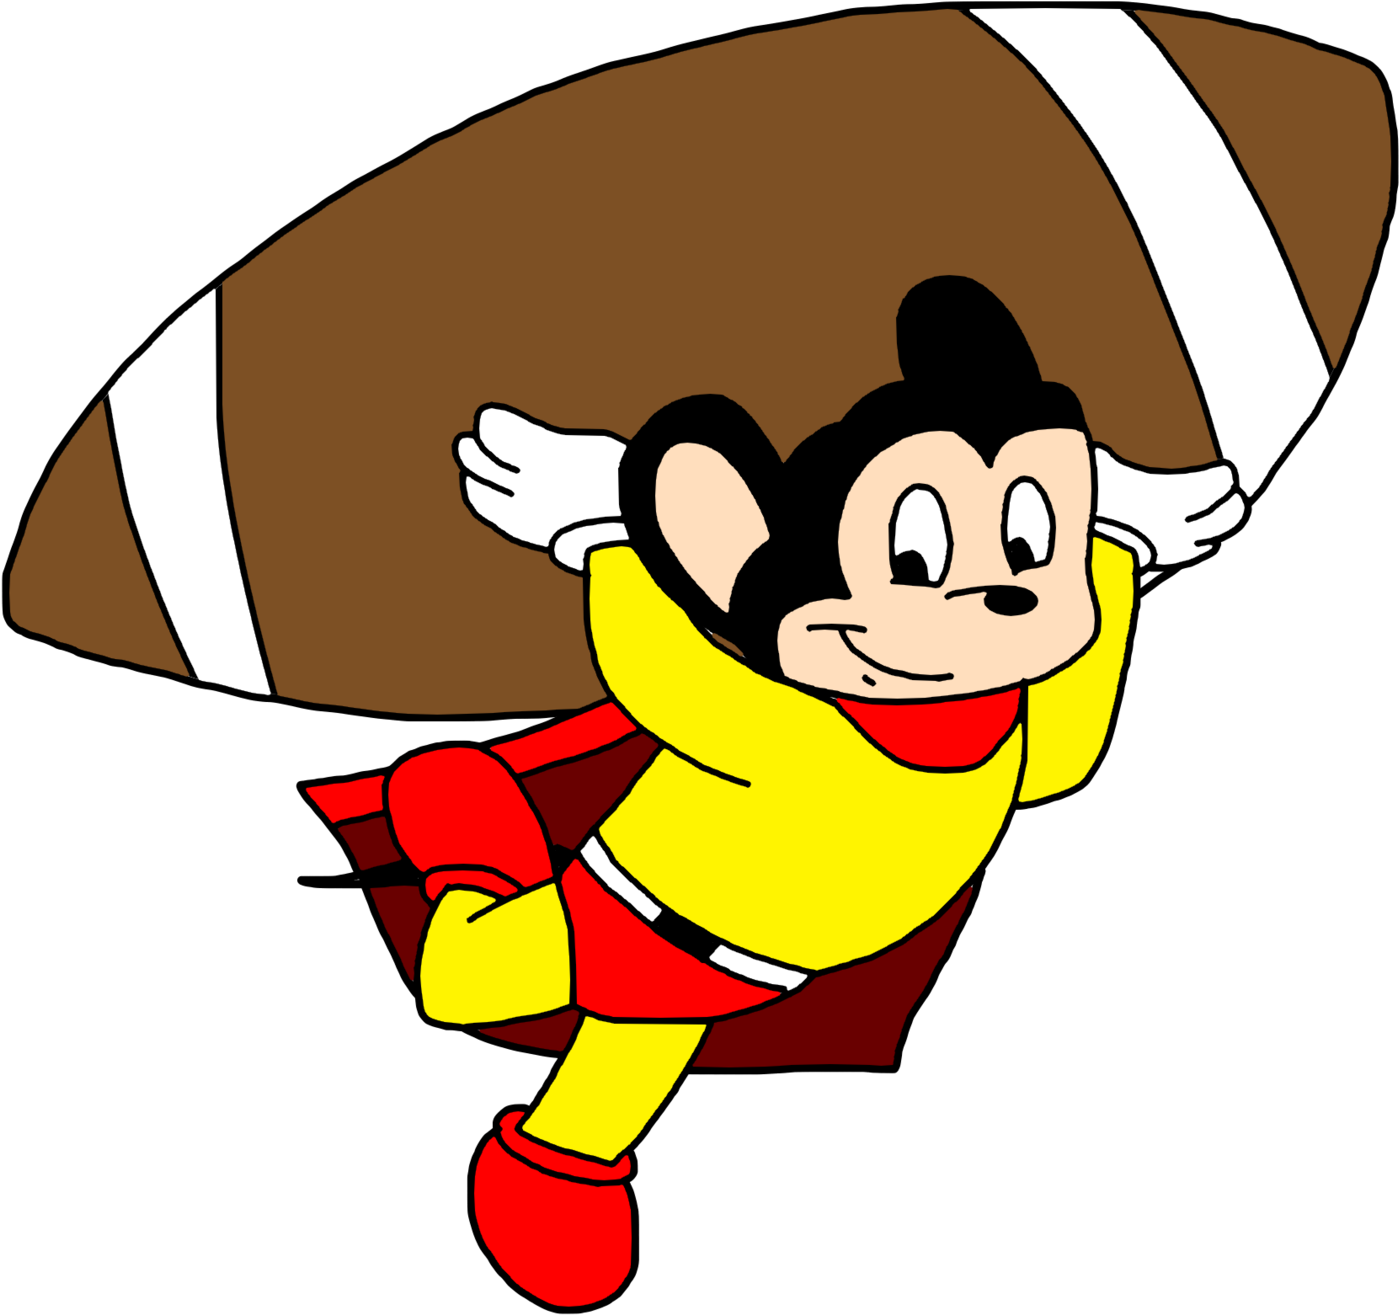 Mighty Mouse With American Football Ball By Marcospower1996 - Clip Art (1600x1600)